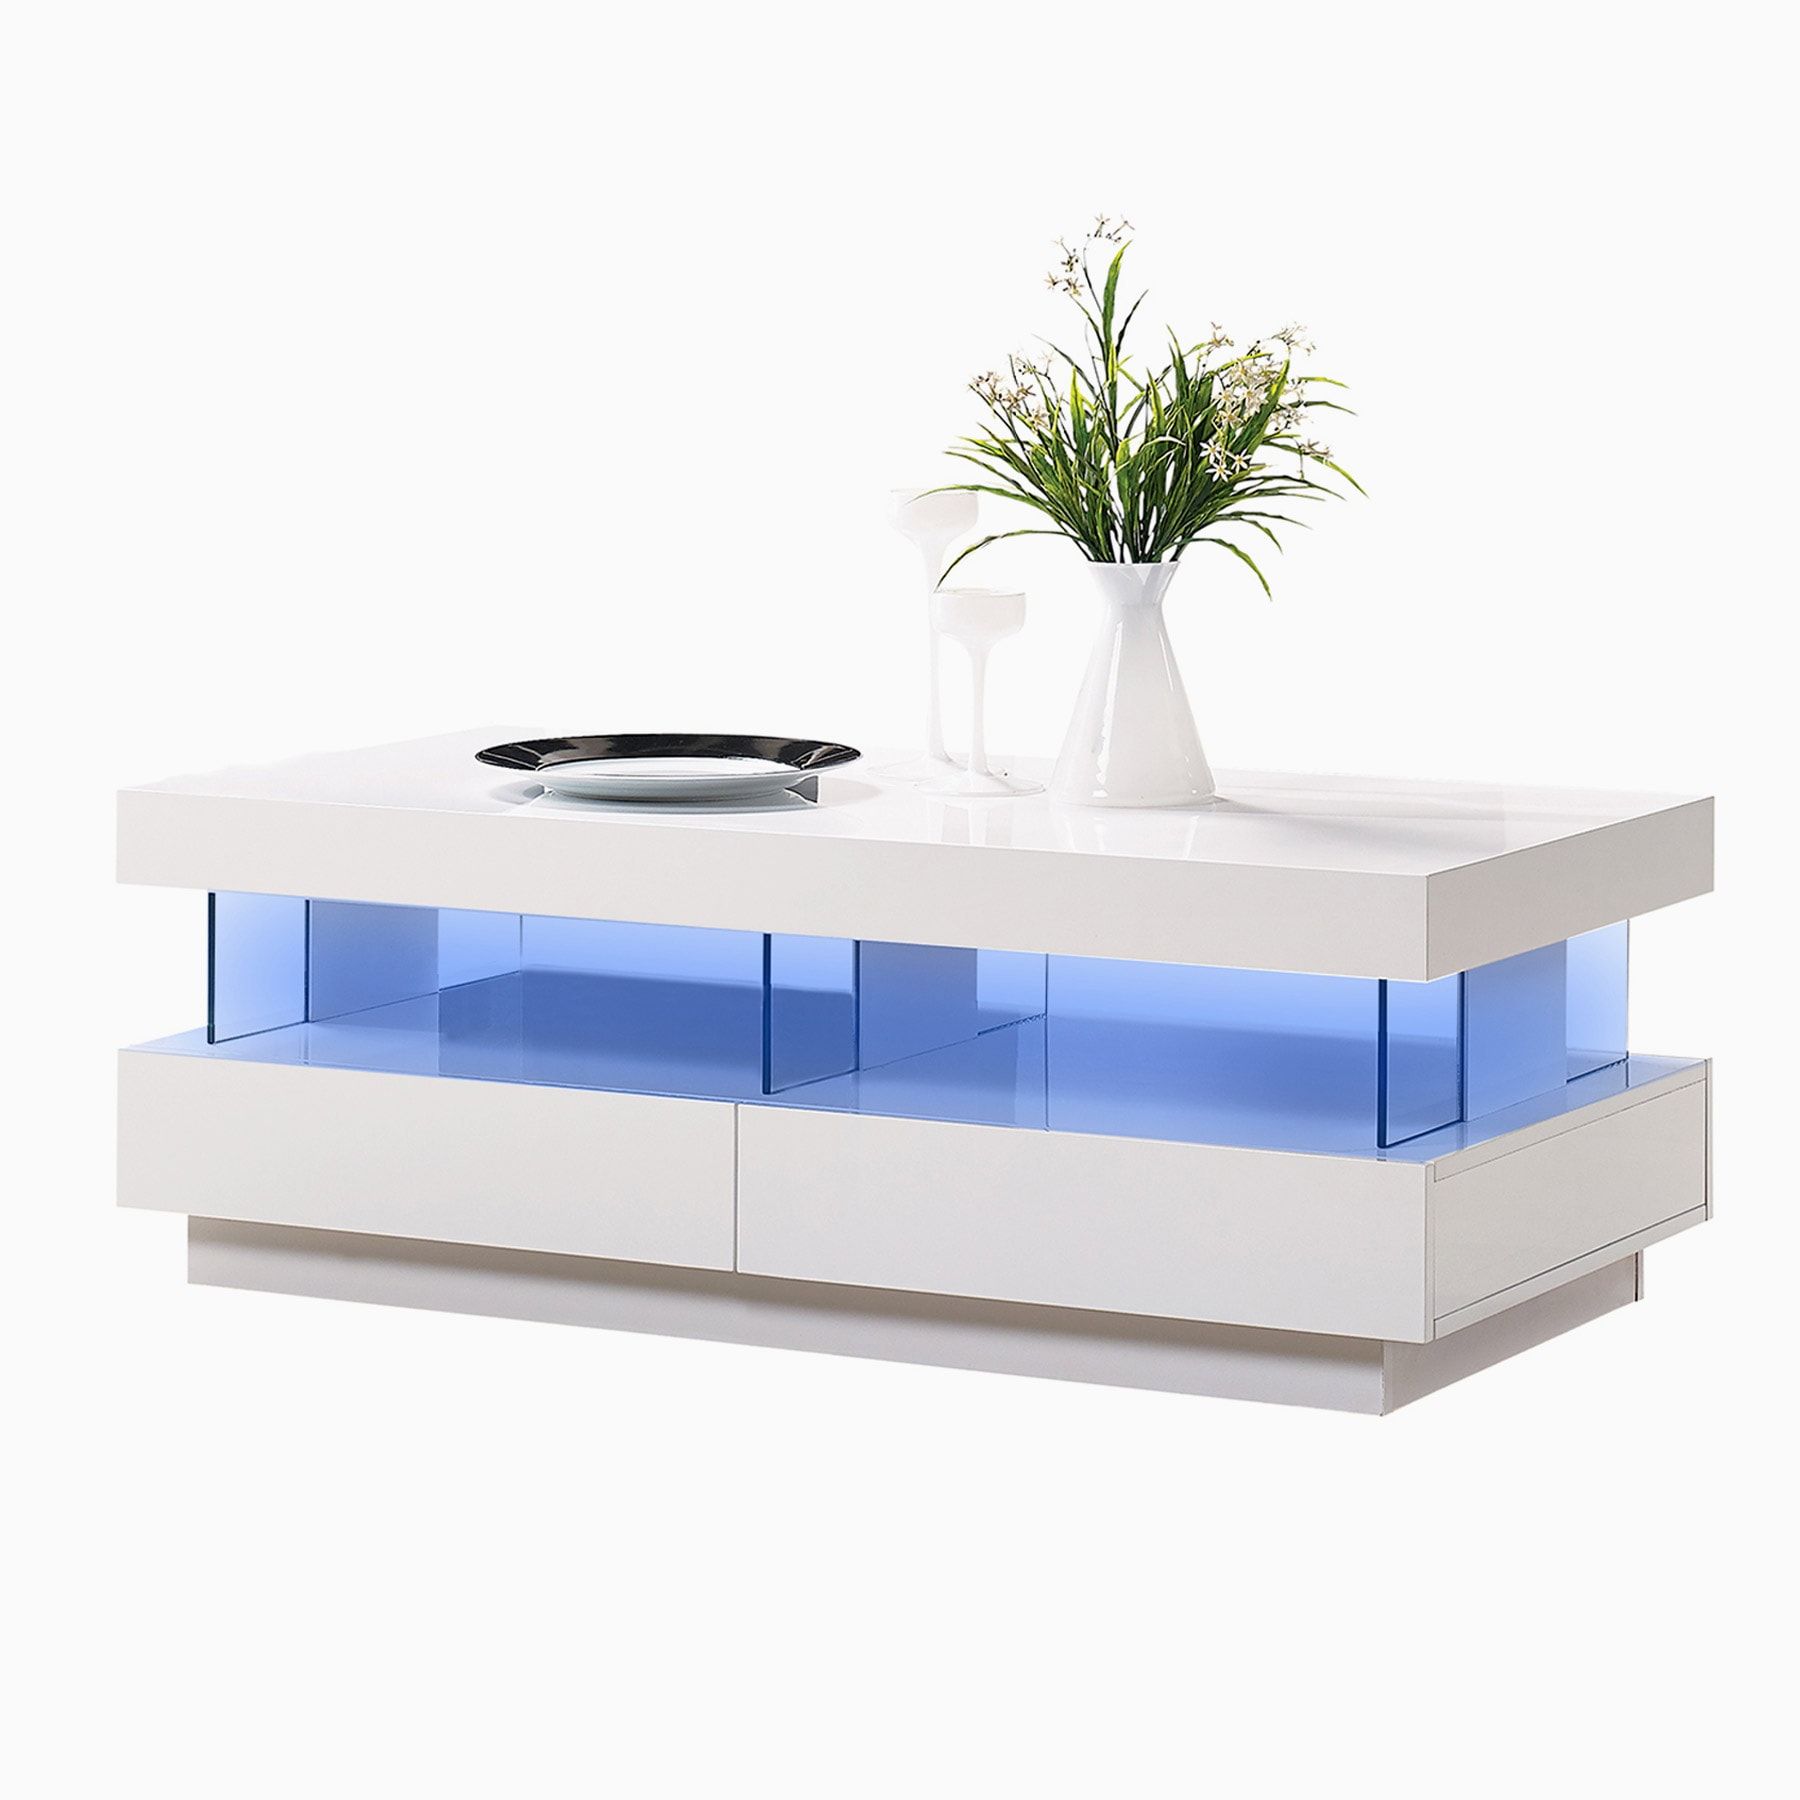 White Gloss Coffee Table Led Light | Au2052d| With Coffee Tables With Drawers And Led Lights (View 14 of 20)